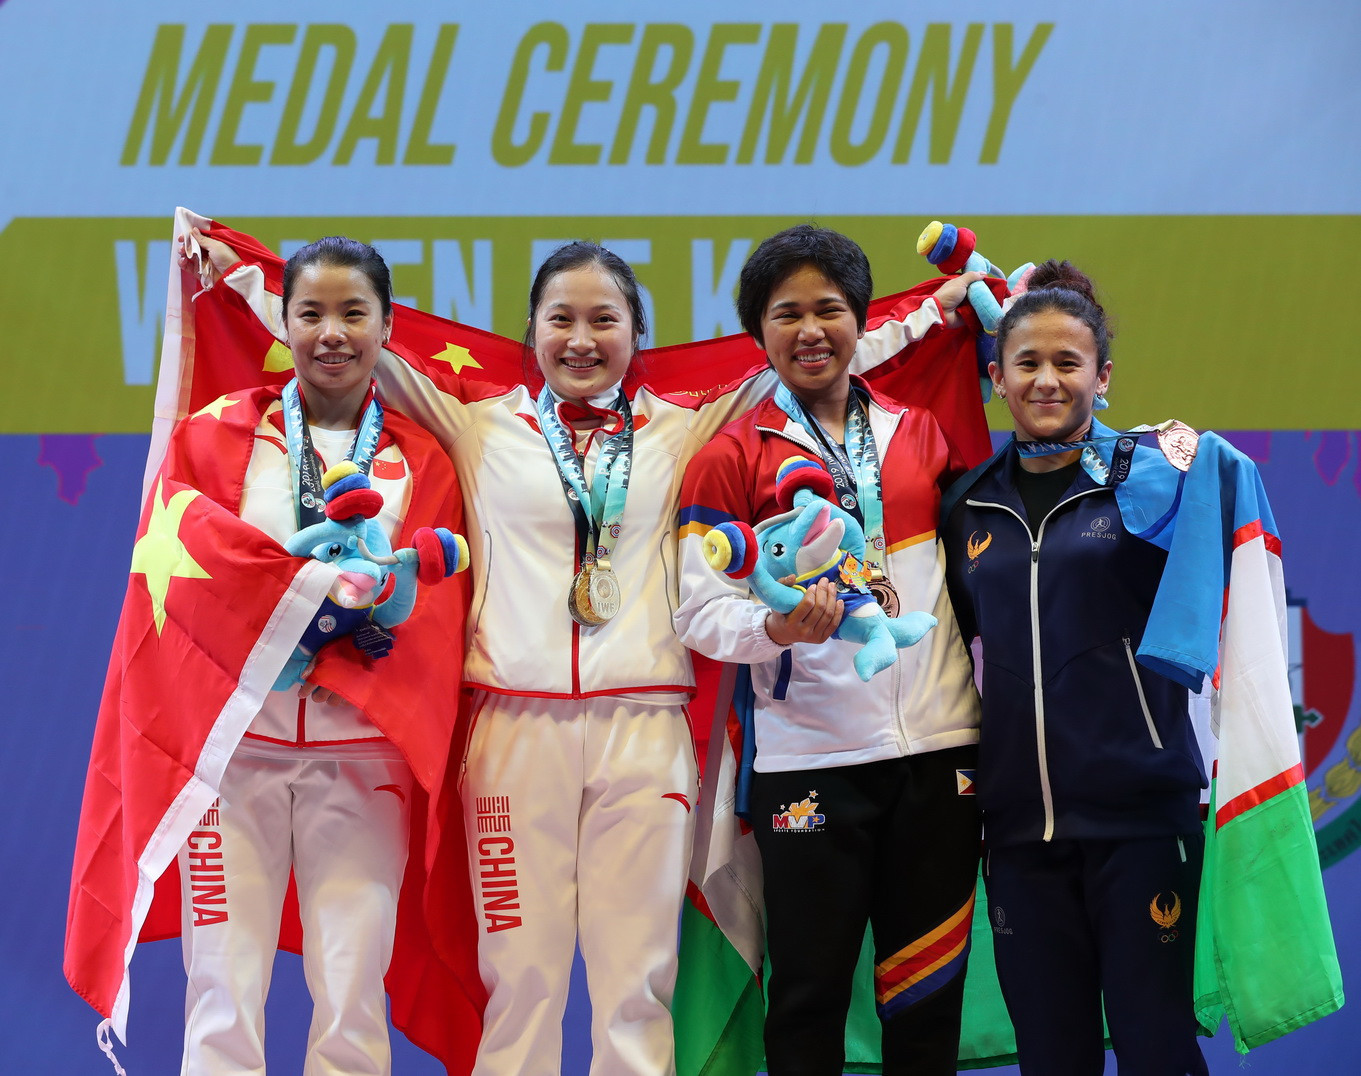 And celebrated with her fellow medallists, including the third-place finisher in the snatch, Uzbekistan's Muattar Nabieva ©IWF